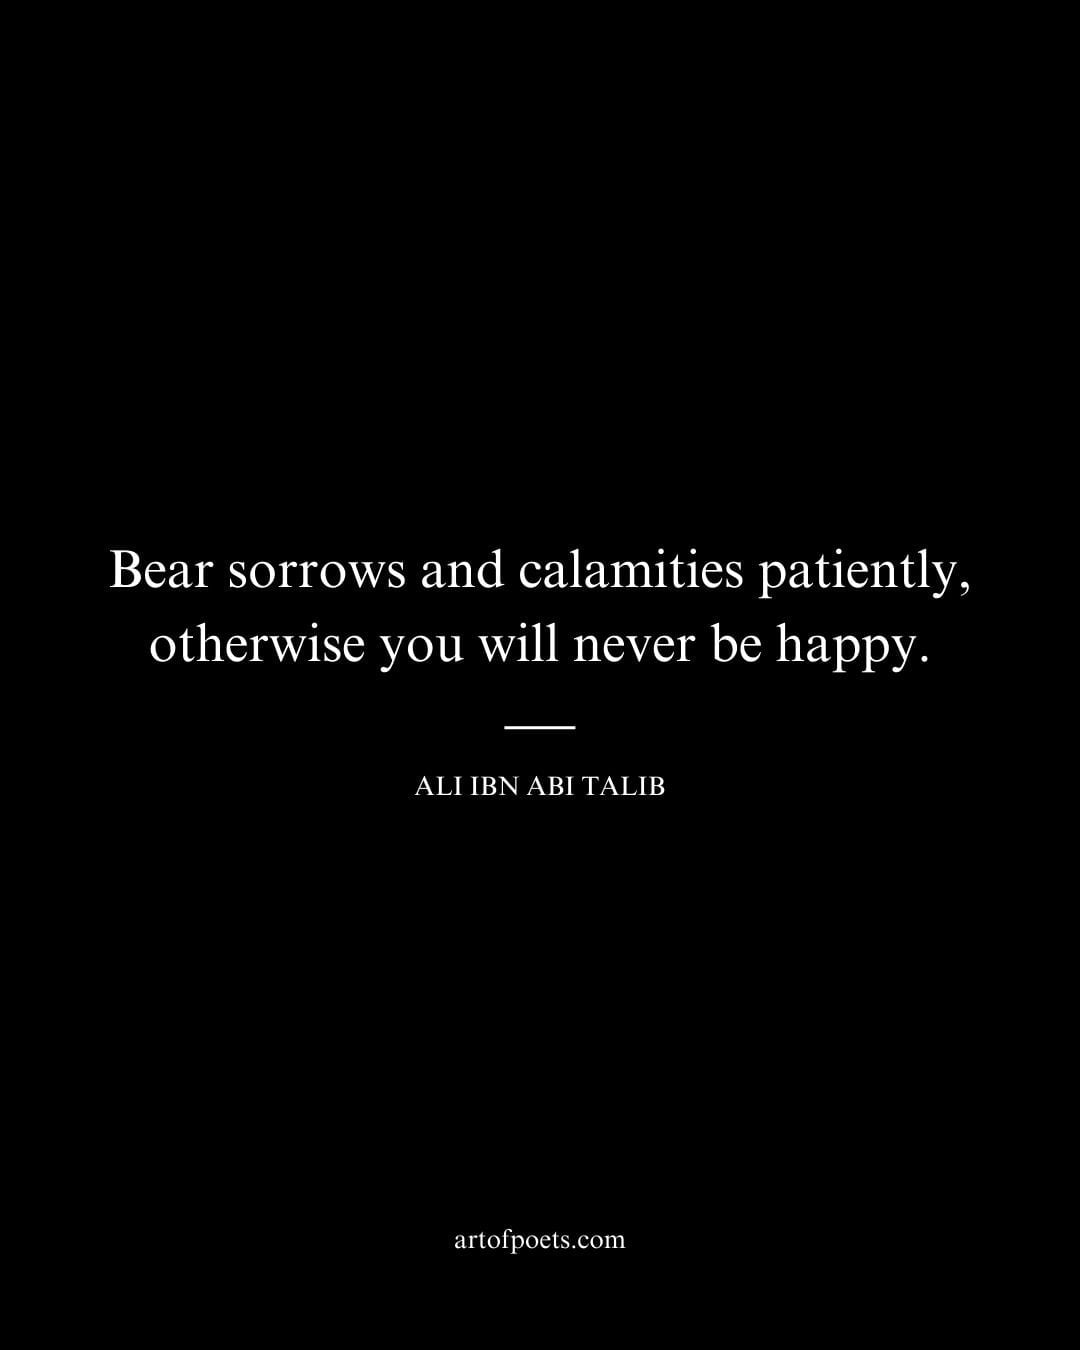 Bear sorrows and calamities patiently otherwise you will never be happy